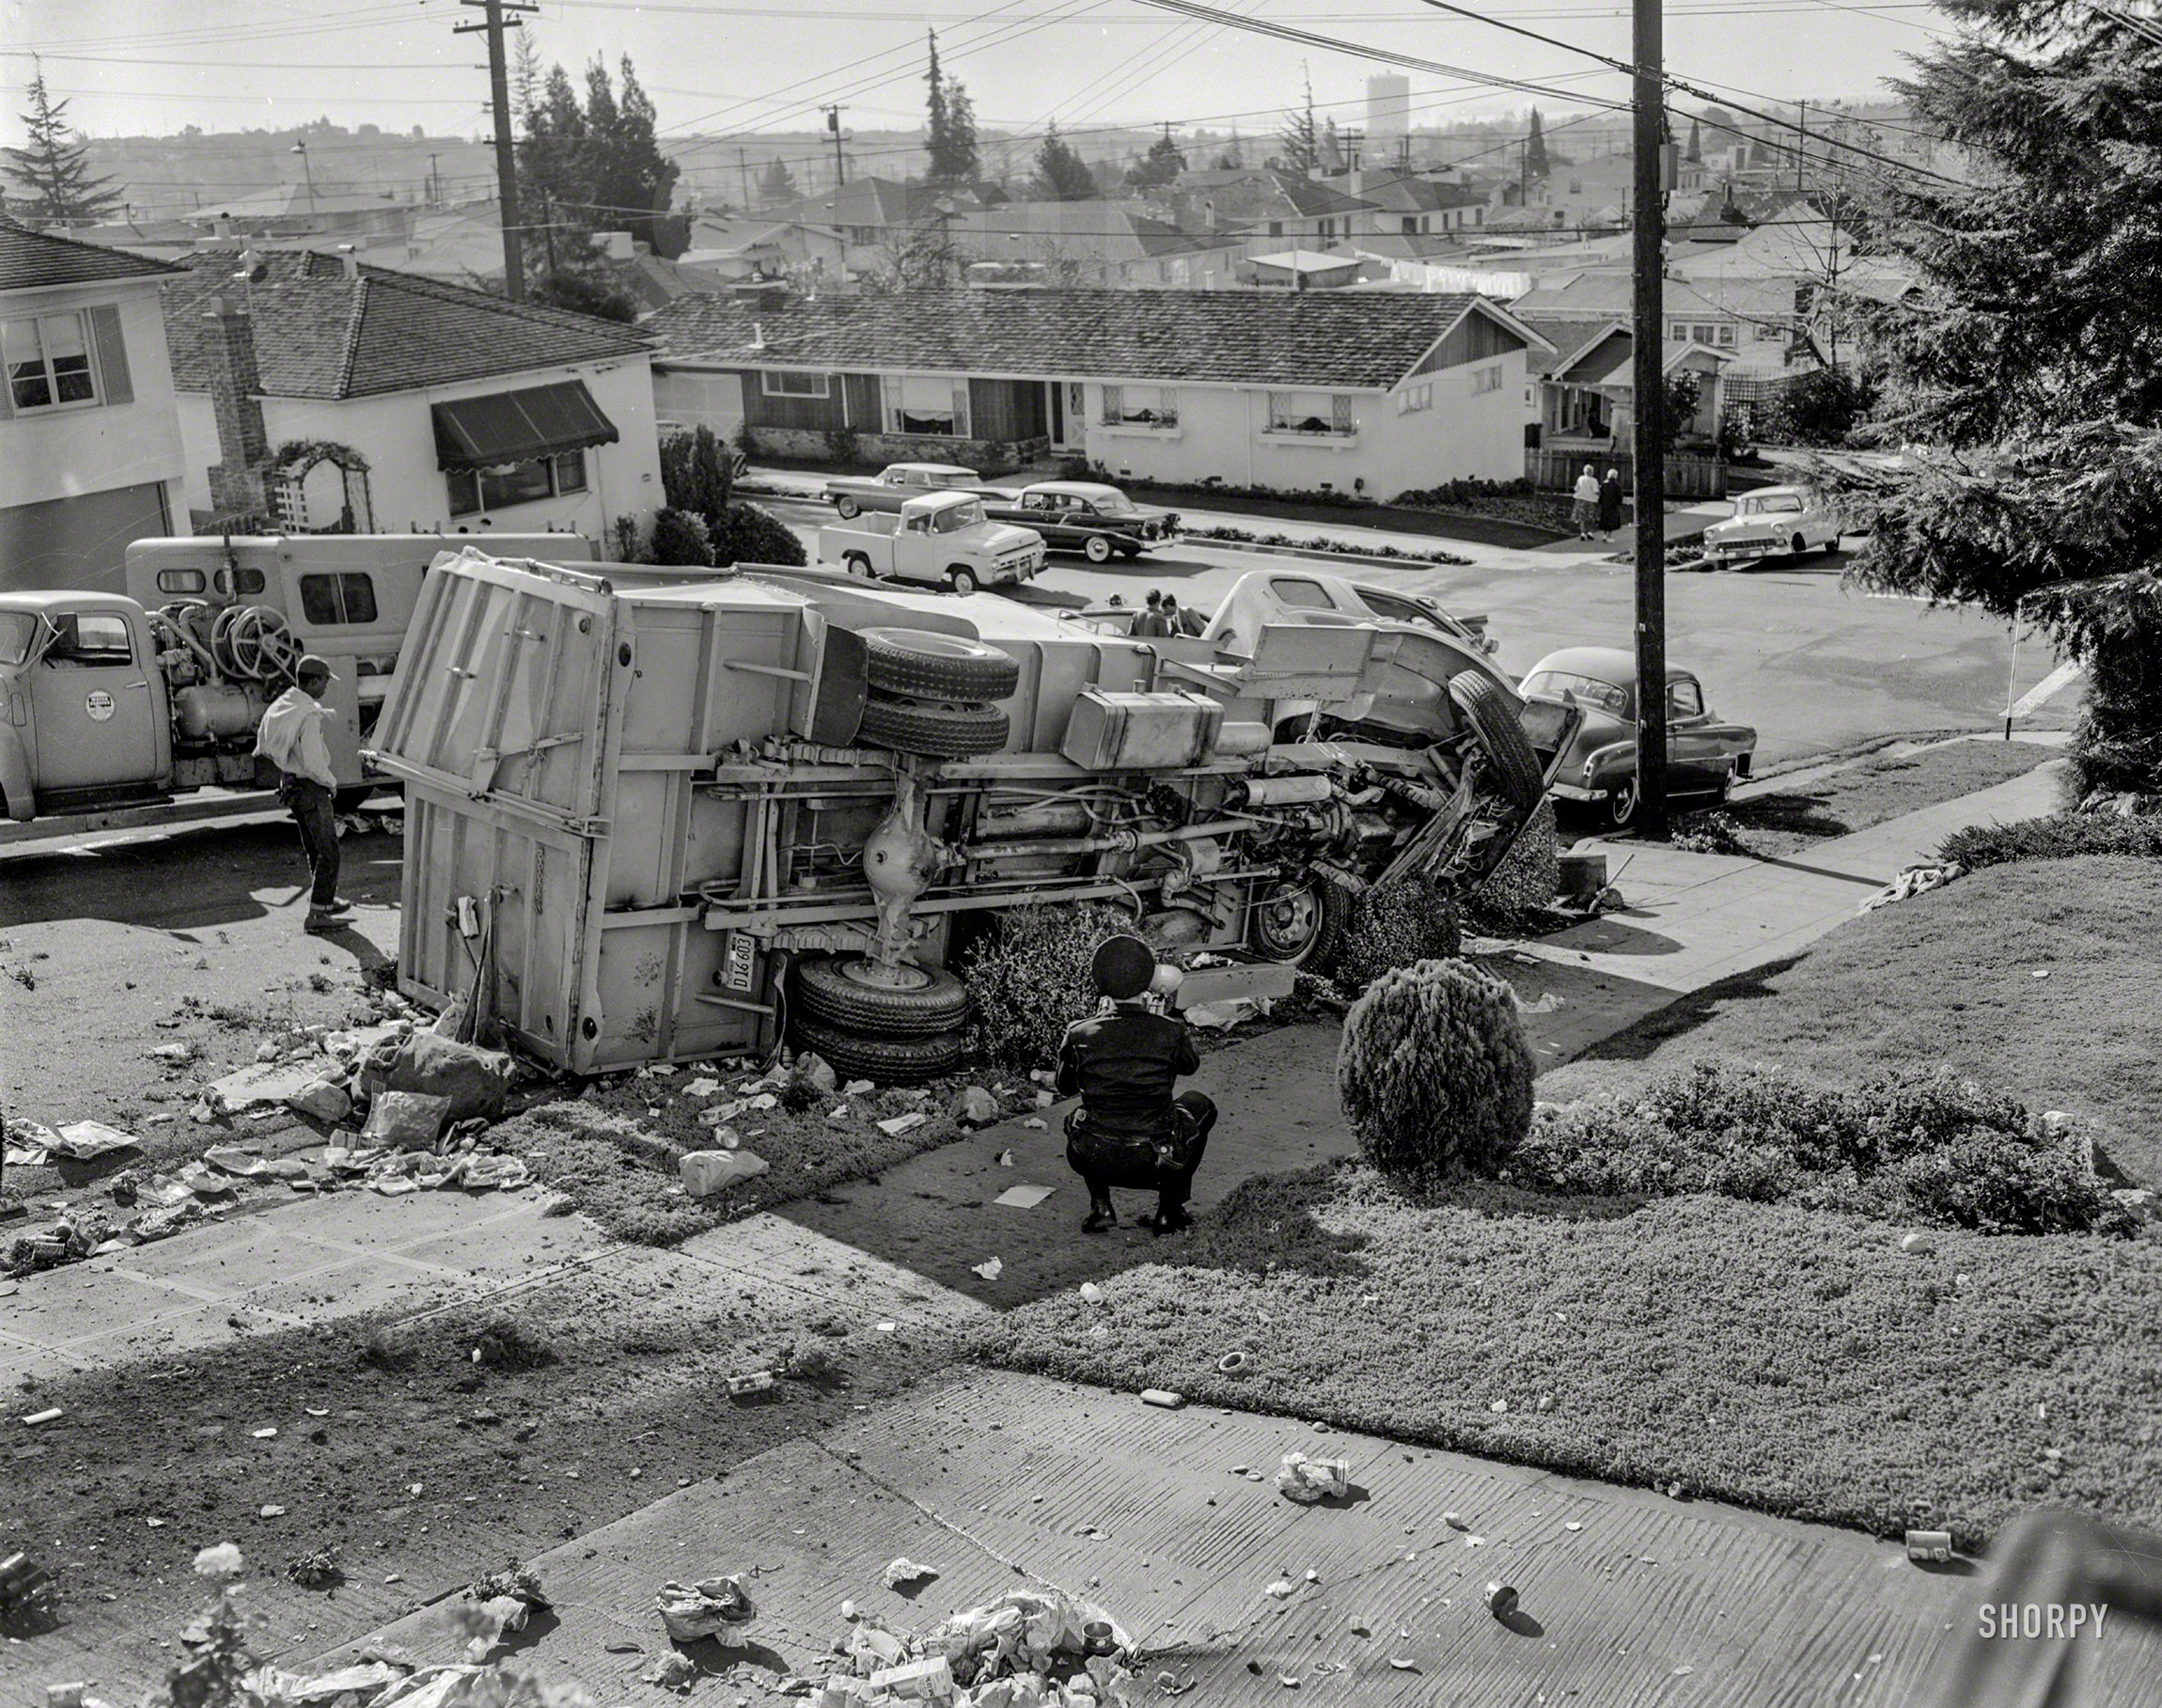 Oakland, California, circa 1959. "Garbage truck accident." With lots of vintage unsorted refuse destined for the landfill or incinerator. Or, in this case, your front lawn. 4x5 acetate negative. Who can ID the neighborhood? View full size.